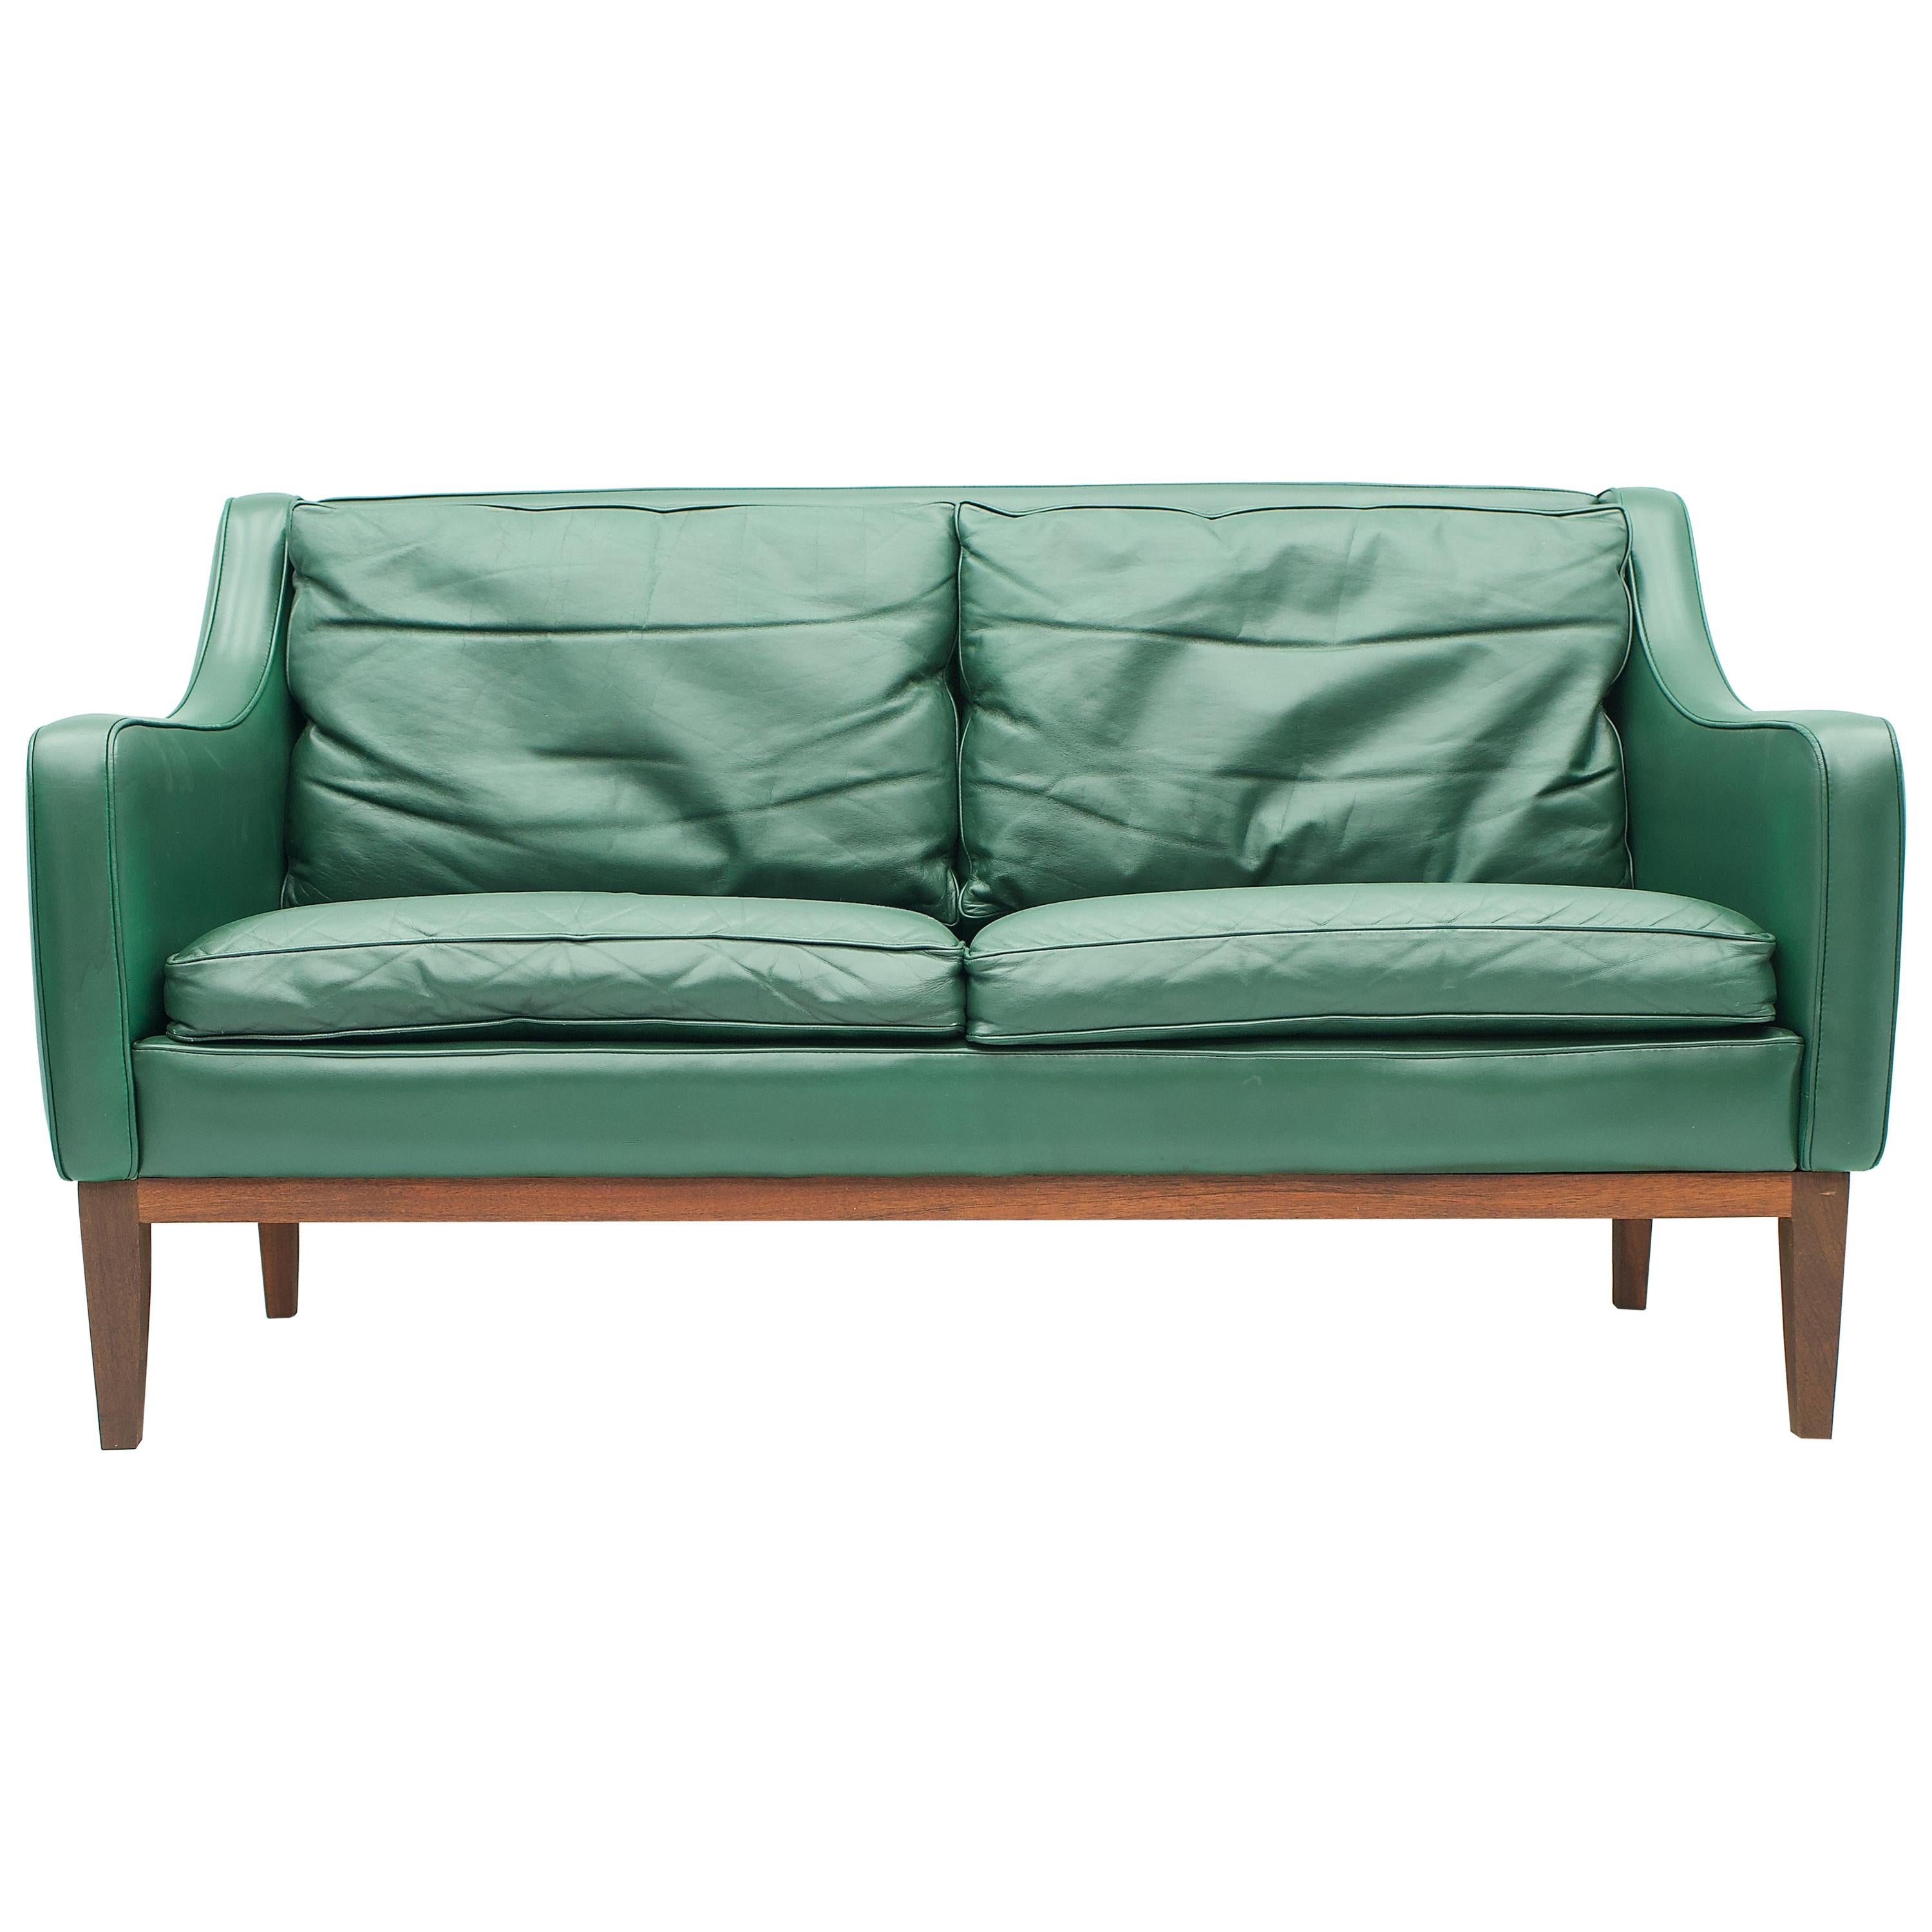 Two-Seat Sofa in Green Leather, Italy, 1958